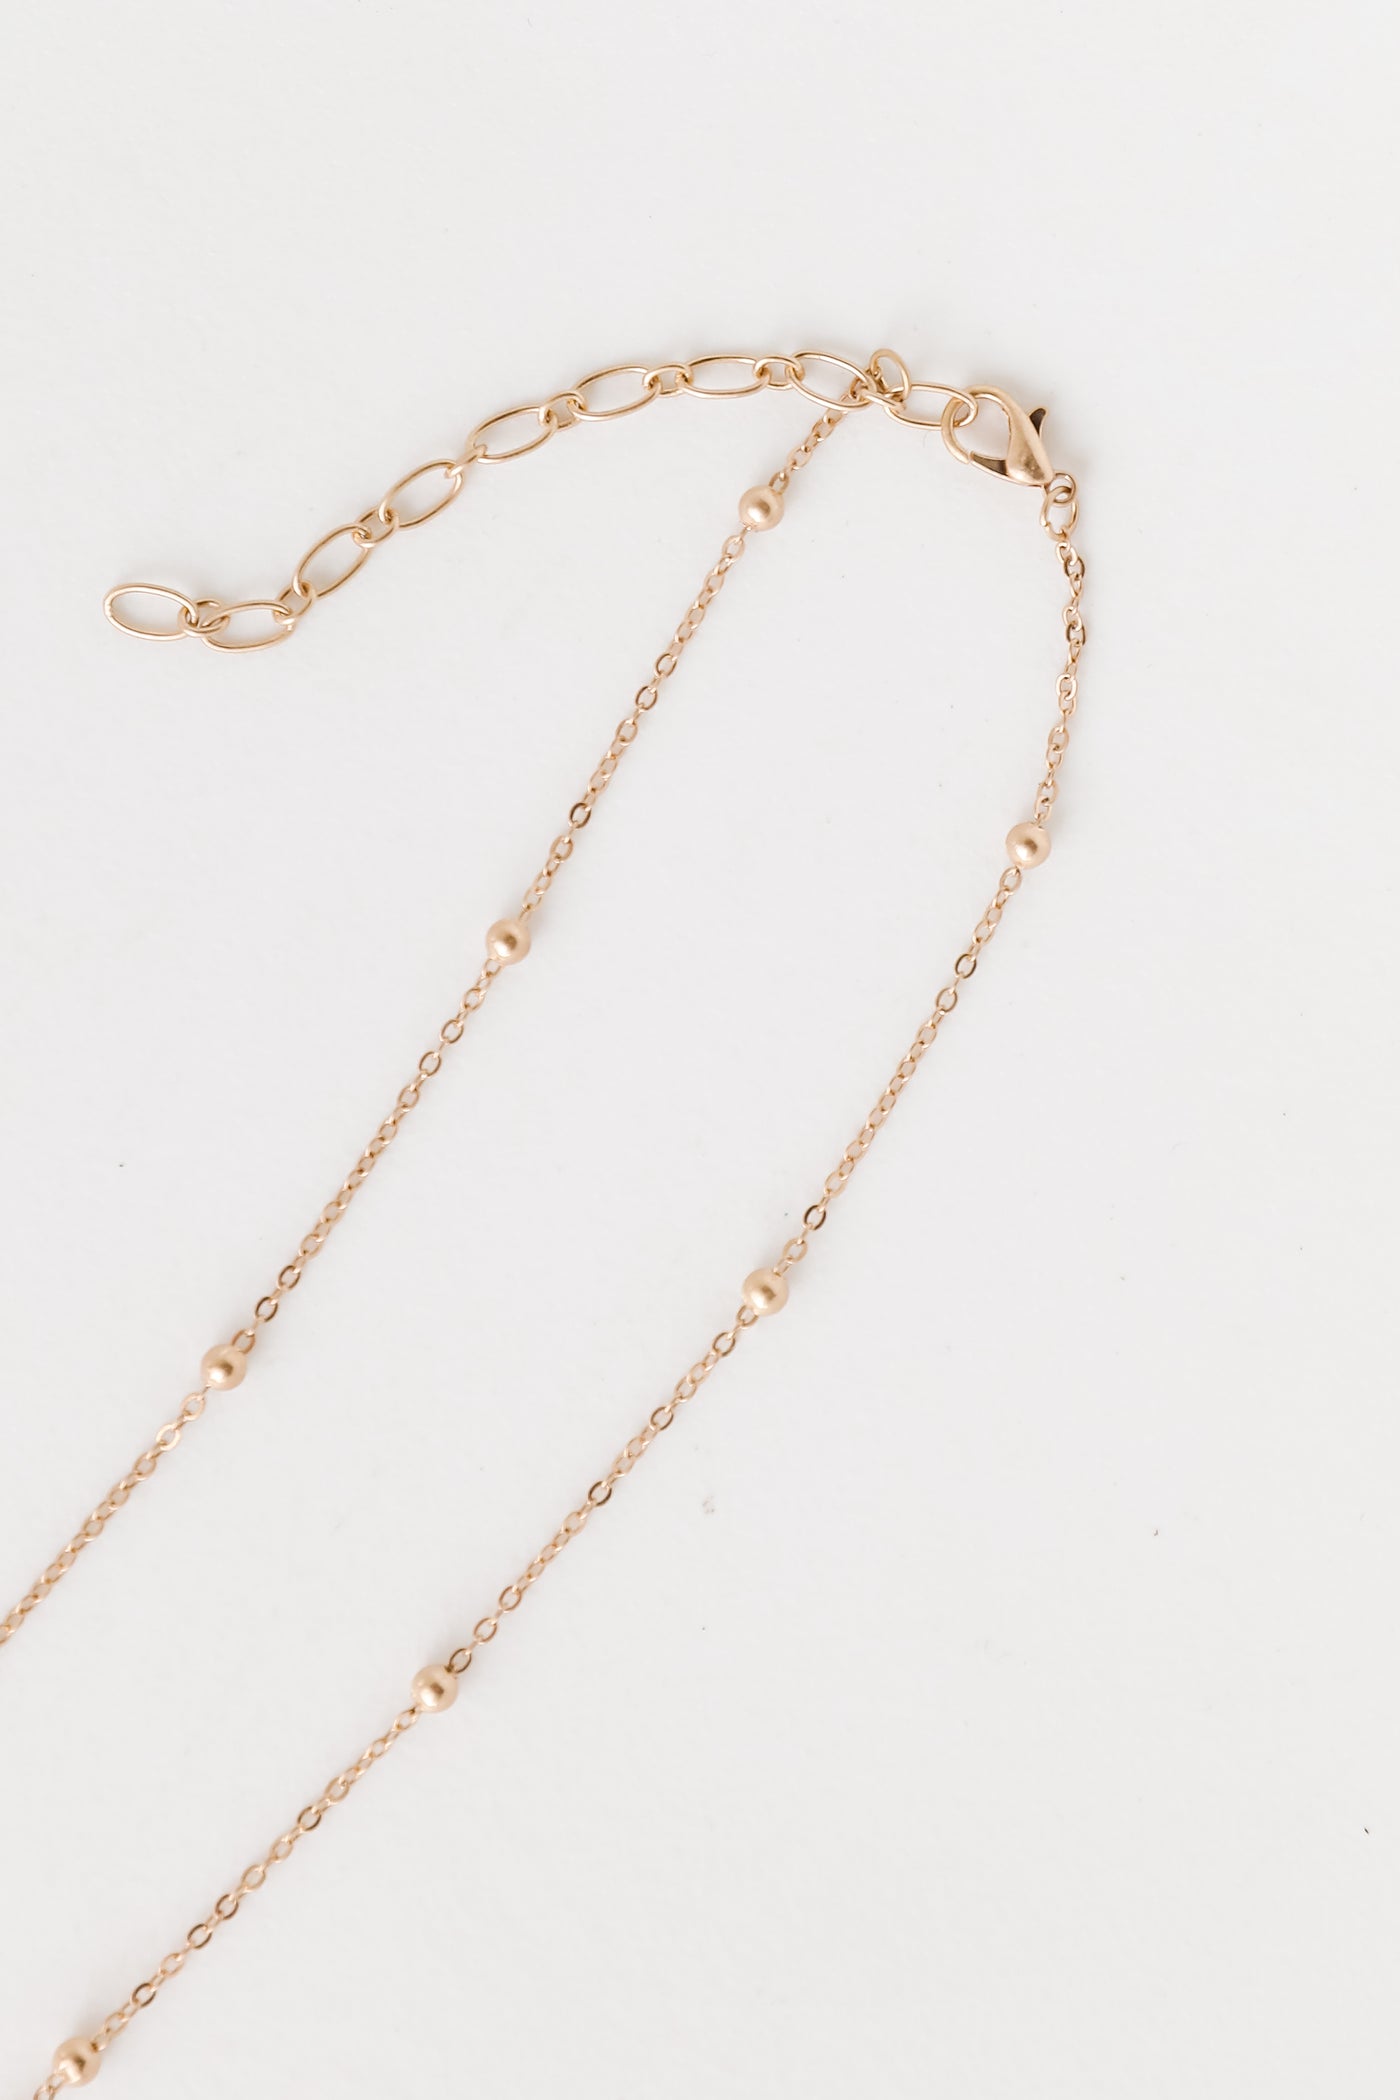 Gold Stone Necklace flat lay